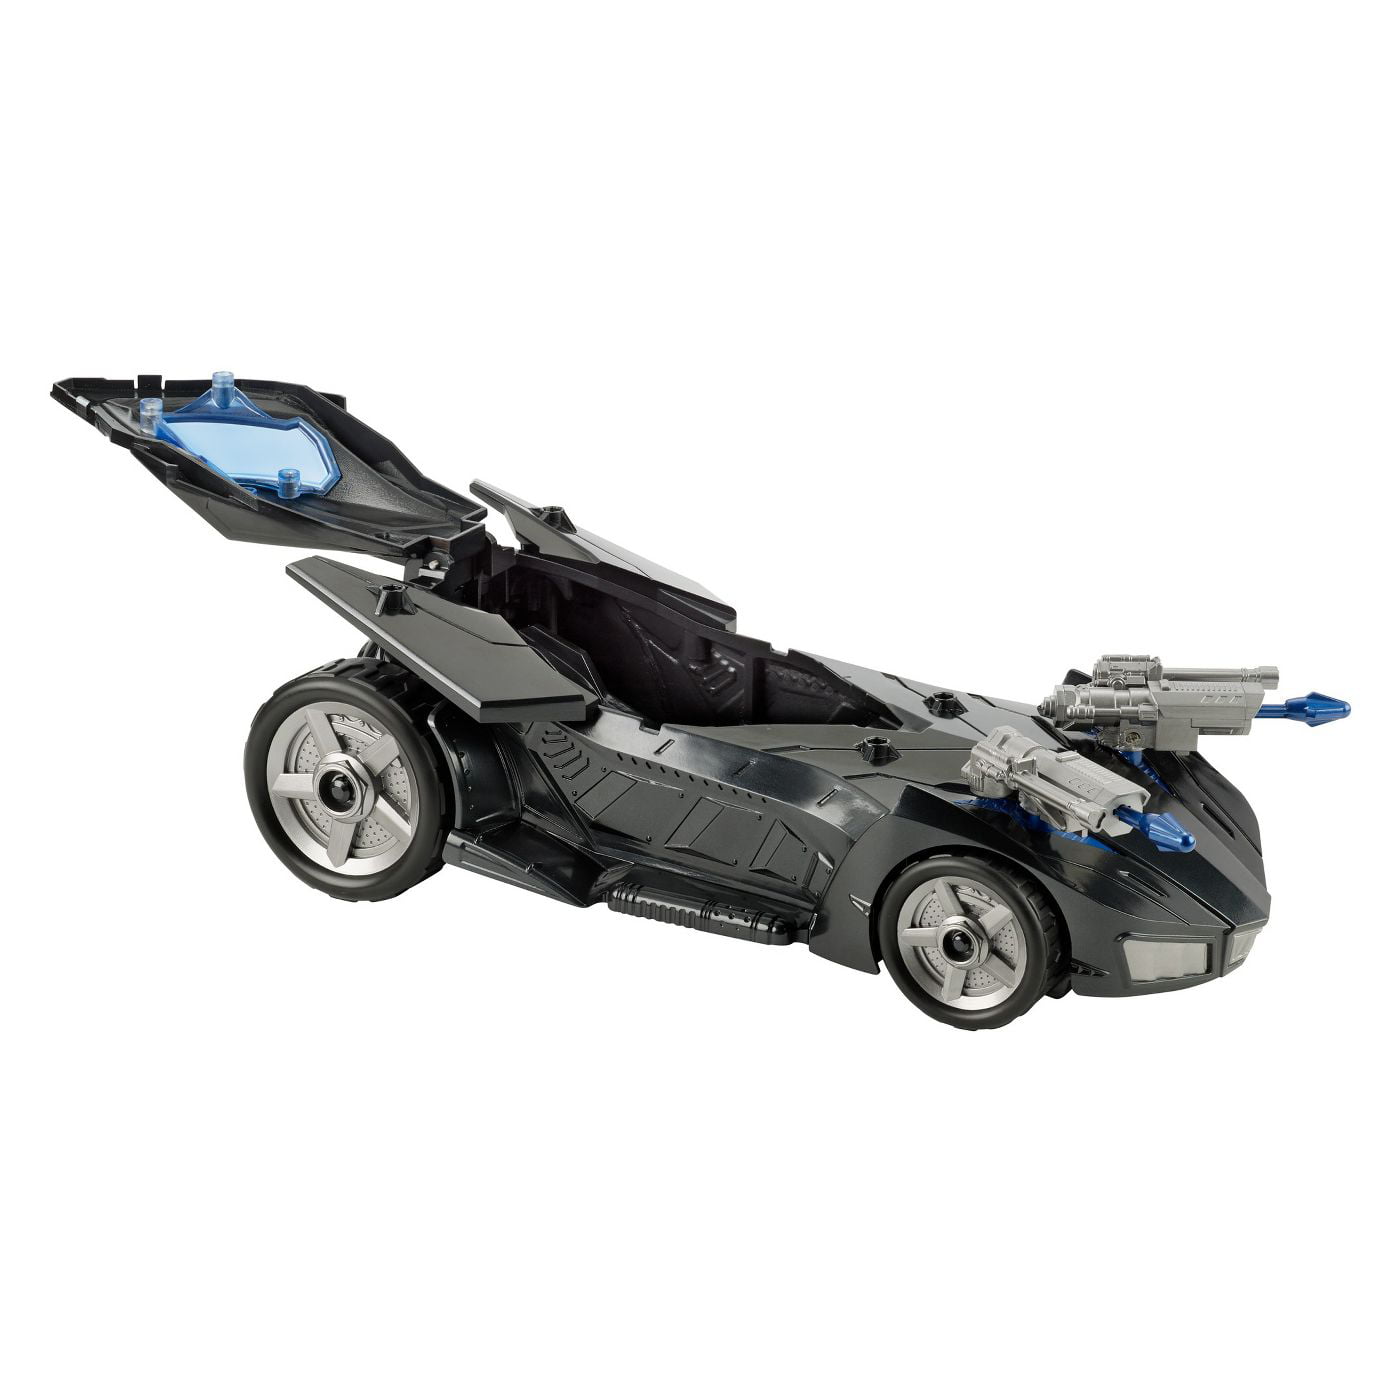 DC Batman Missions and Missile Launching Batmobile Vehicle 